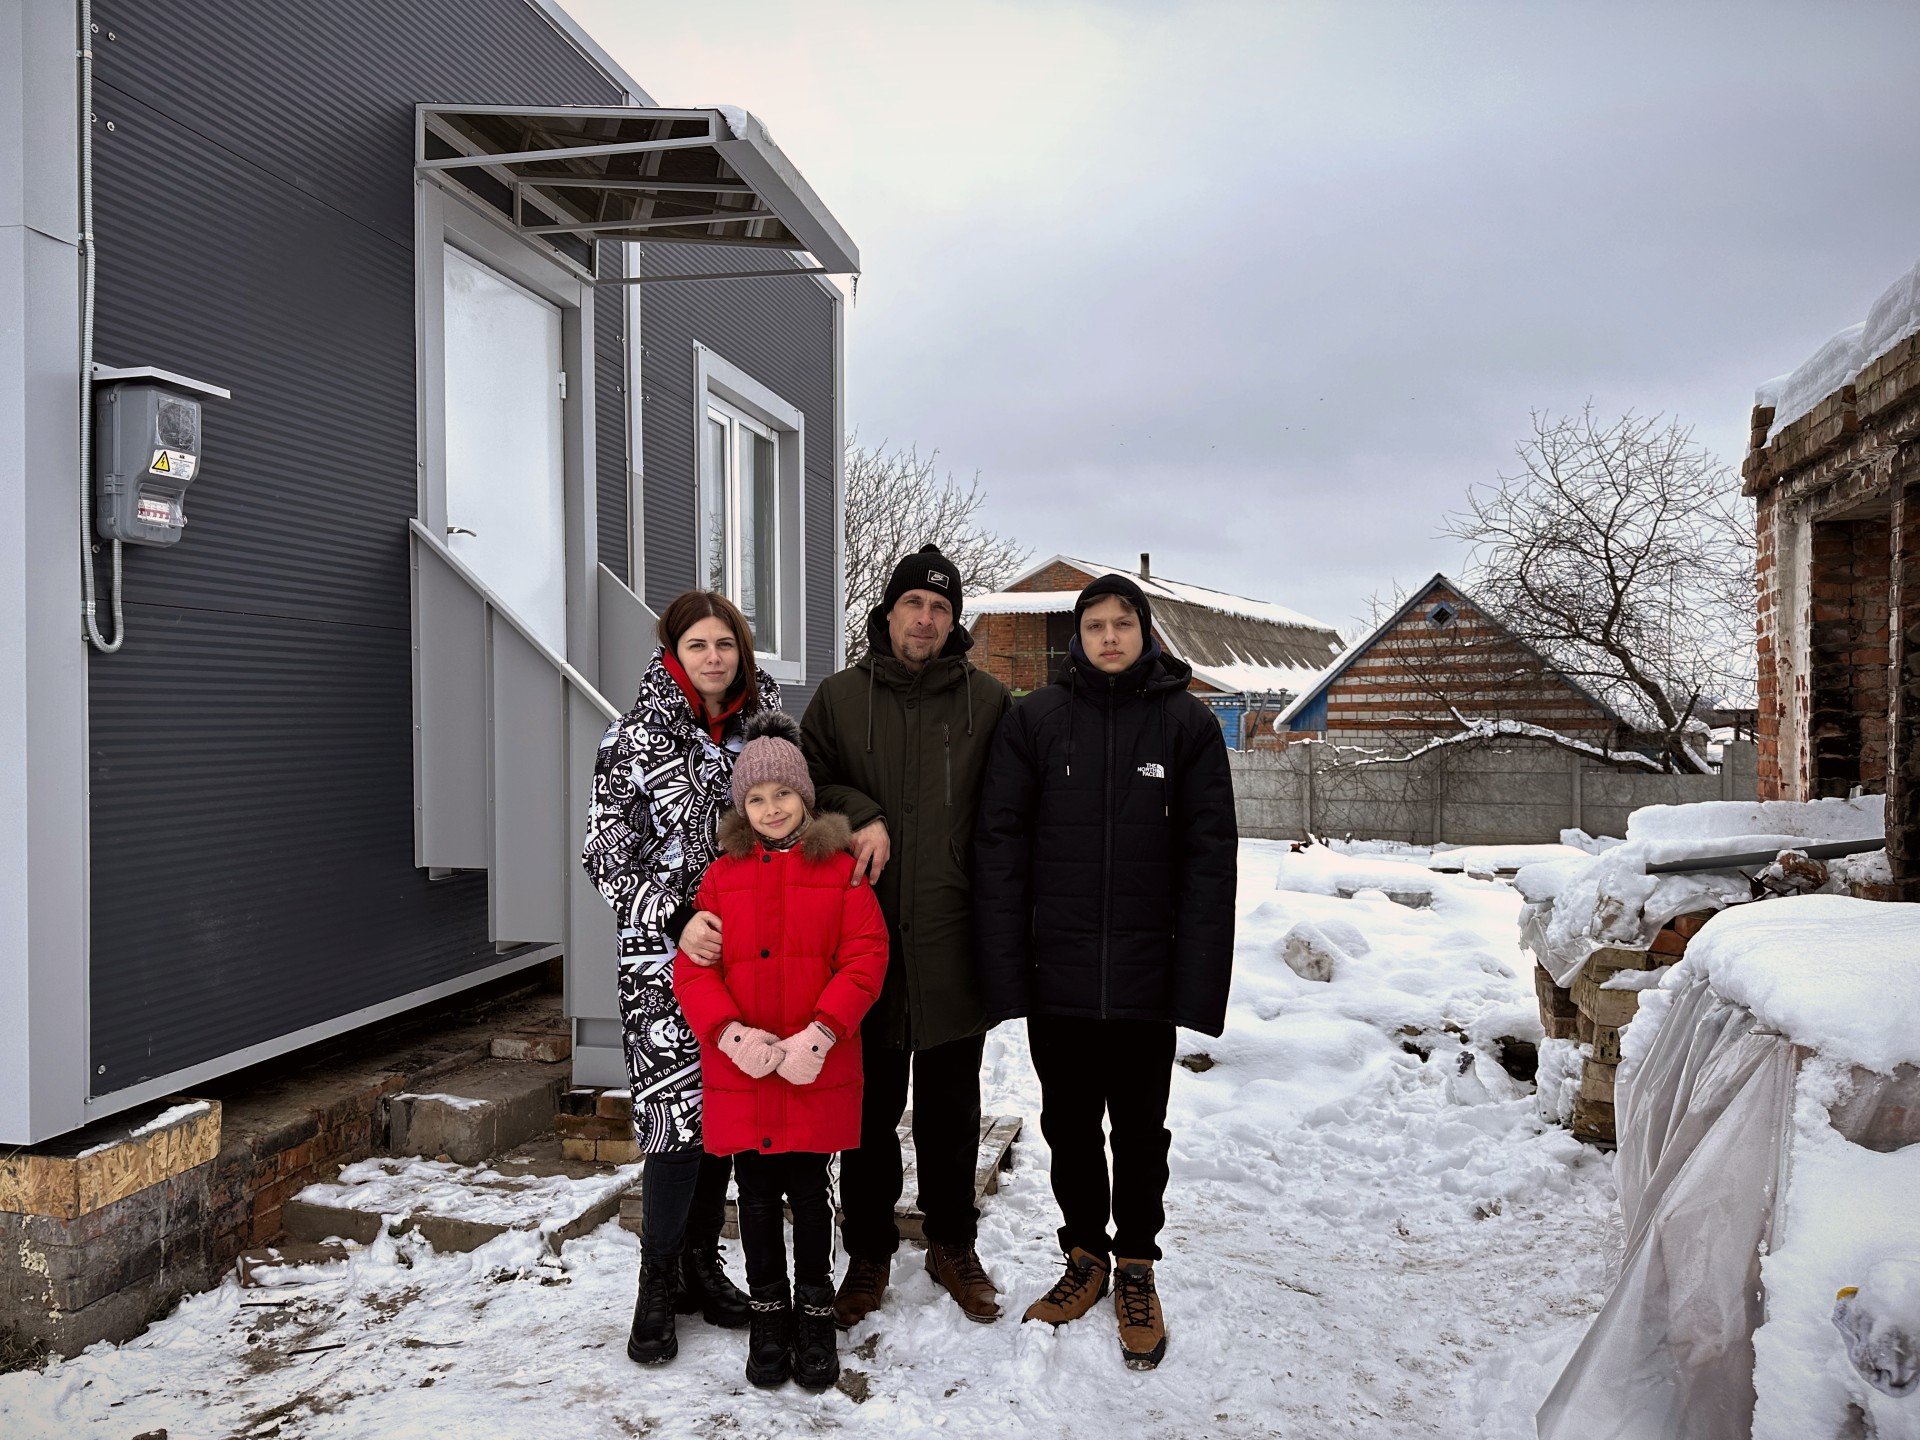 The family near their new modular home |  Source: NEST project